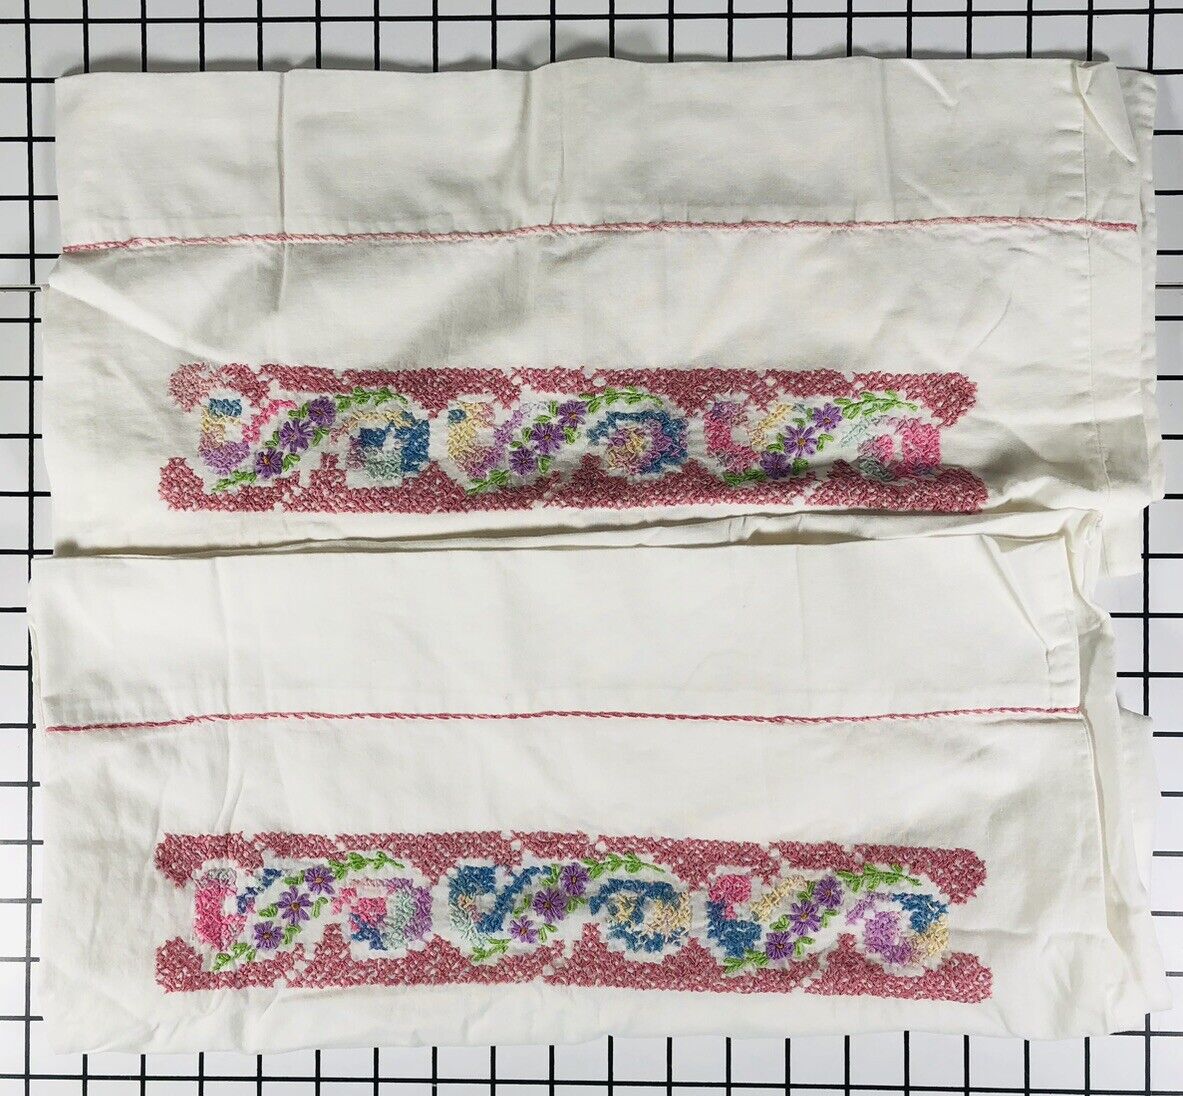 Vtg Embroidered Pillowcases Set 2 Hand Cross Stitch Floral